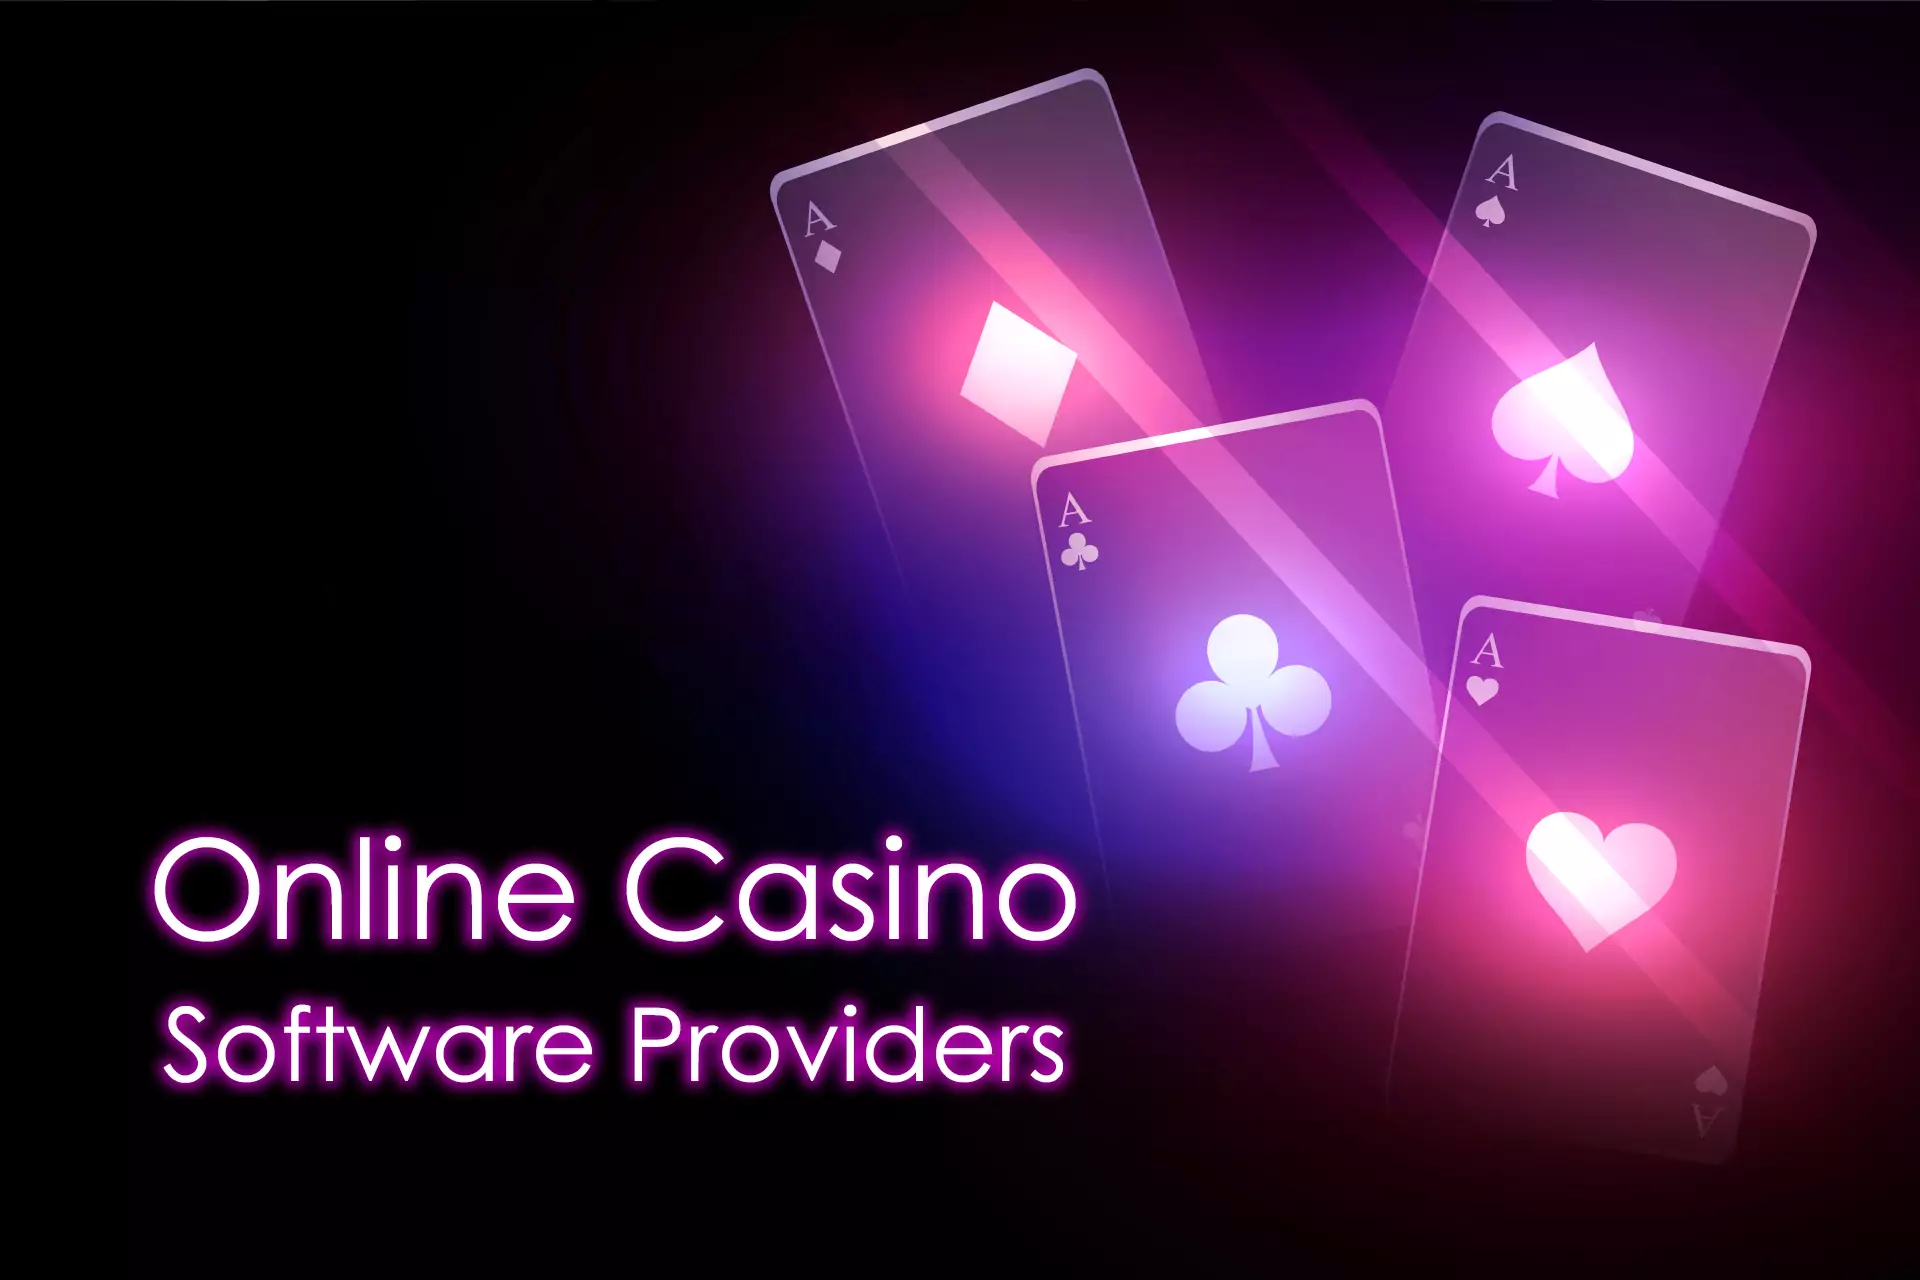 Different software providers develop slots and other casino games that you can play online.